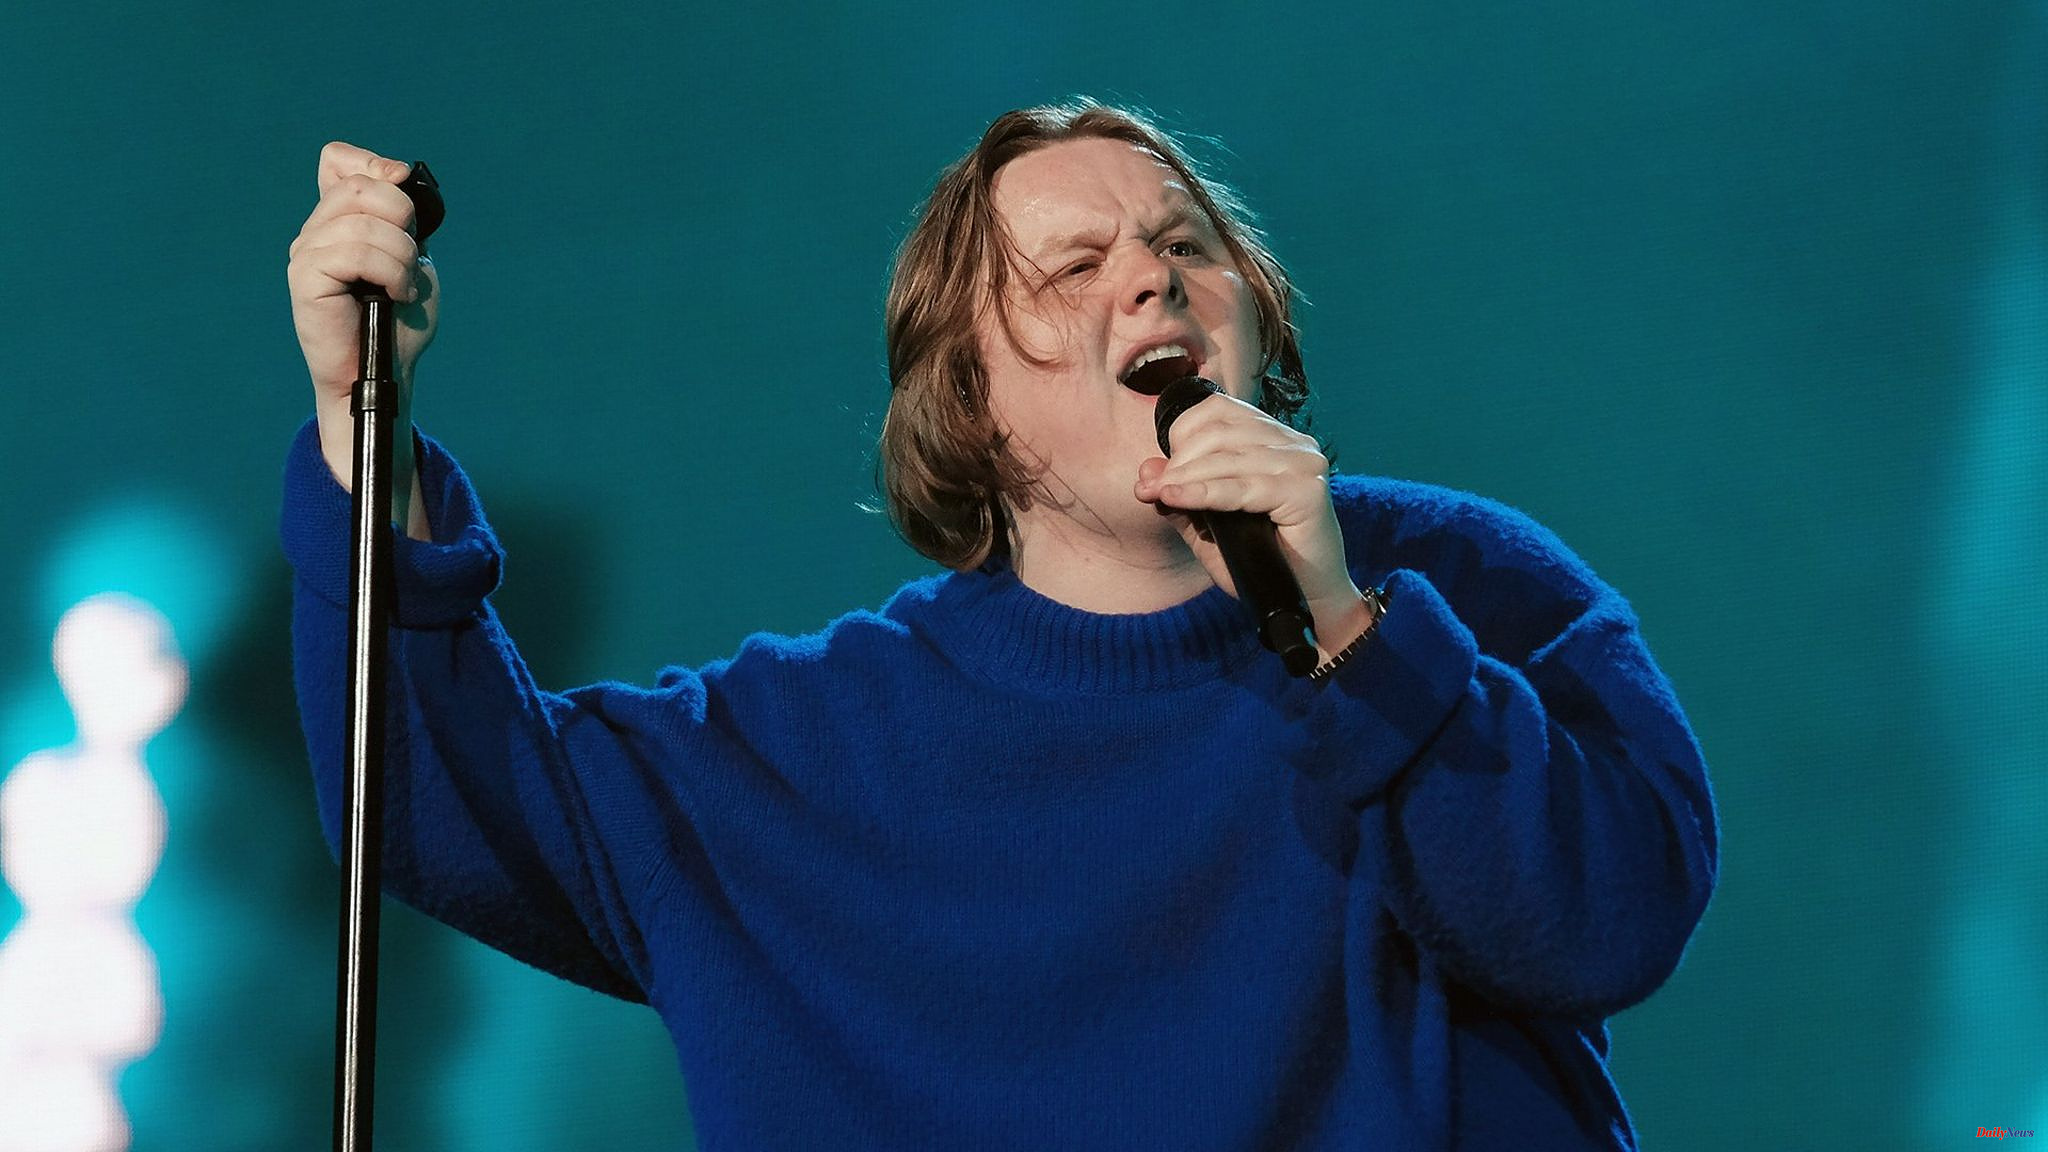 There are no trains to Lewis Capaldi from TRNSMT festival